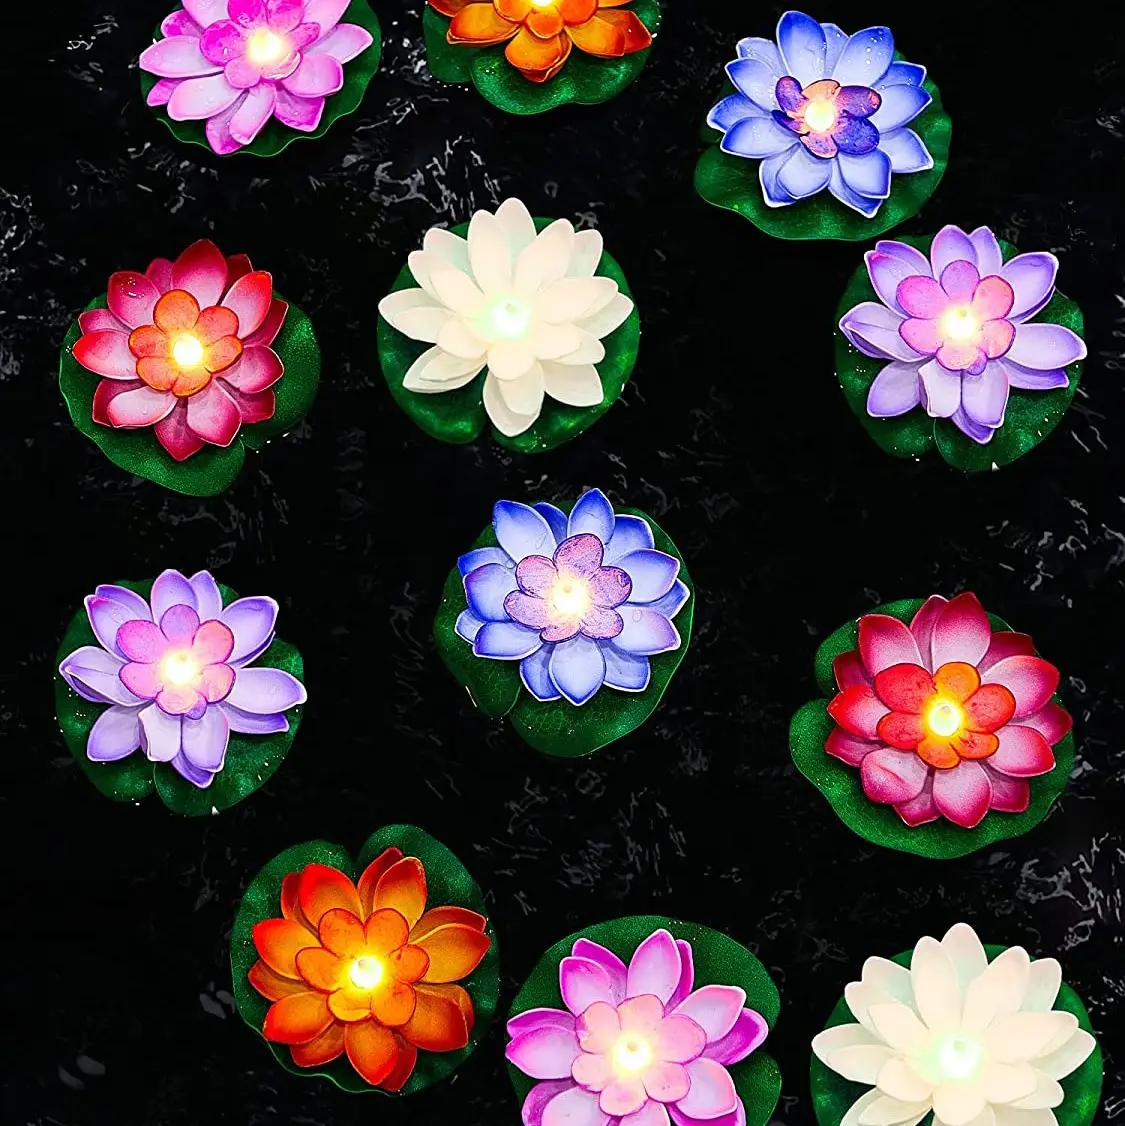 6 PCS Lotus Floating Pool Lights LED Pond Light Battery Operated Water Lily Decor Accessories Flowers 3.94 Inch Multicolor